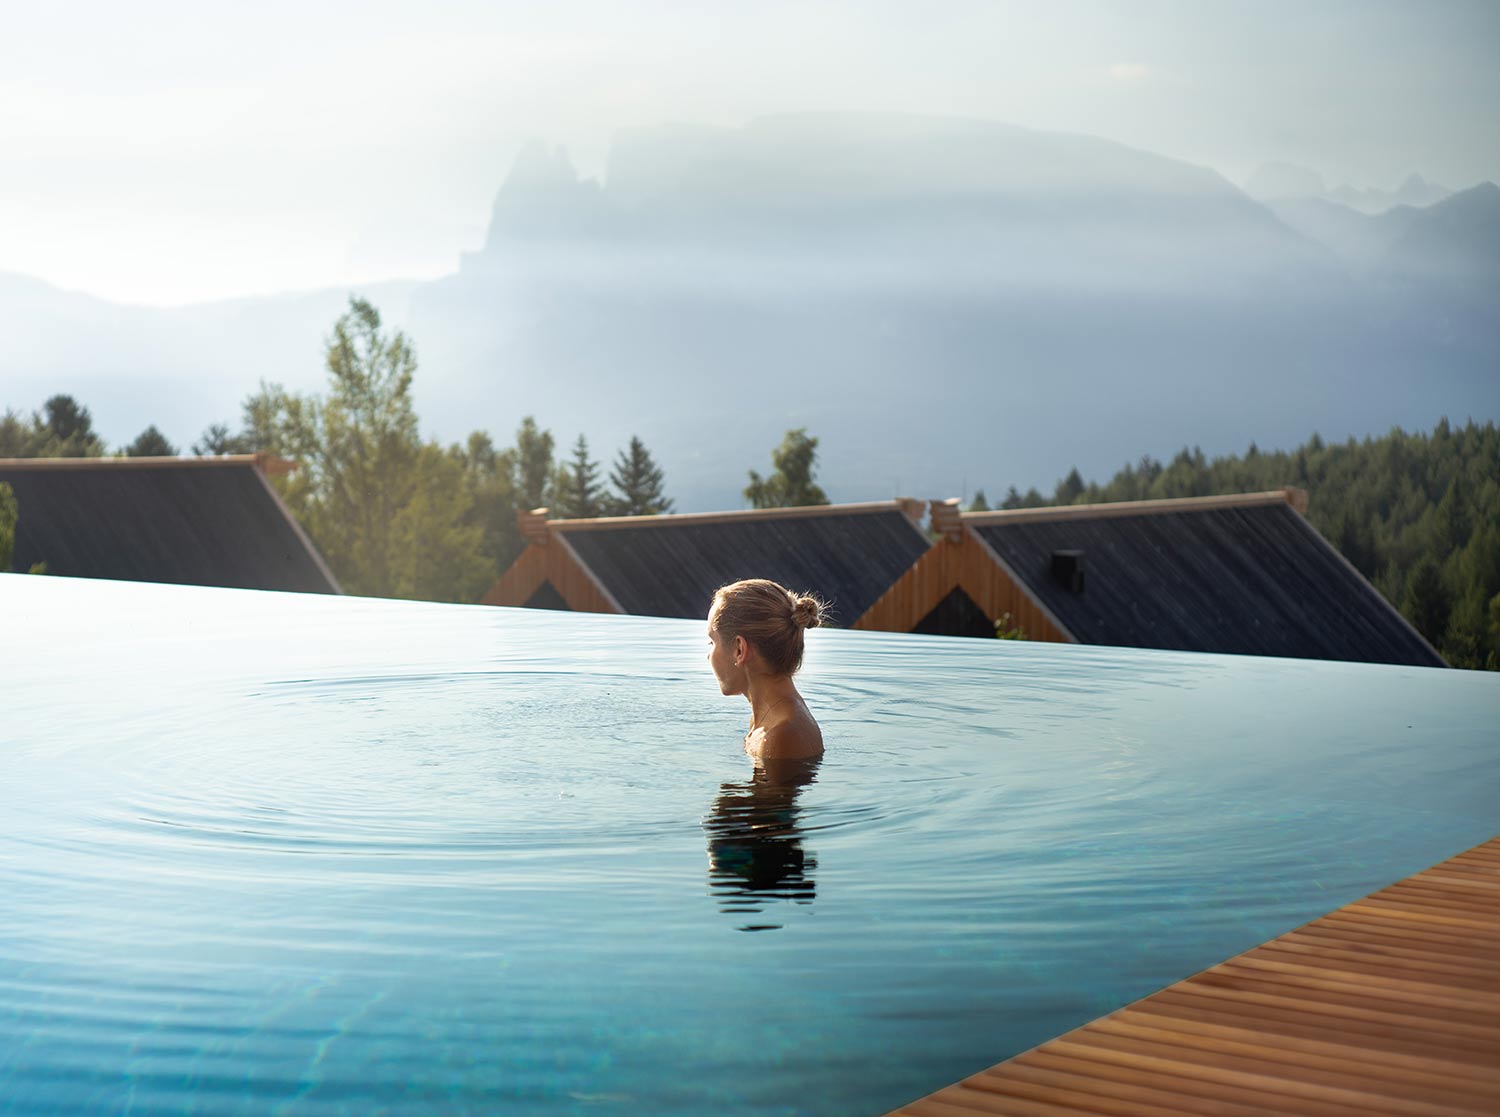 Pretty Hotels: The most beautiful hotels in South Tyrol (Image 13)